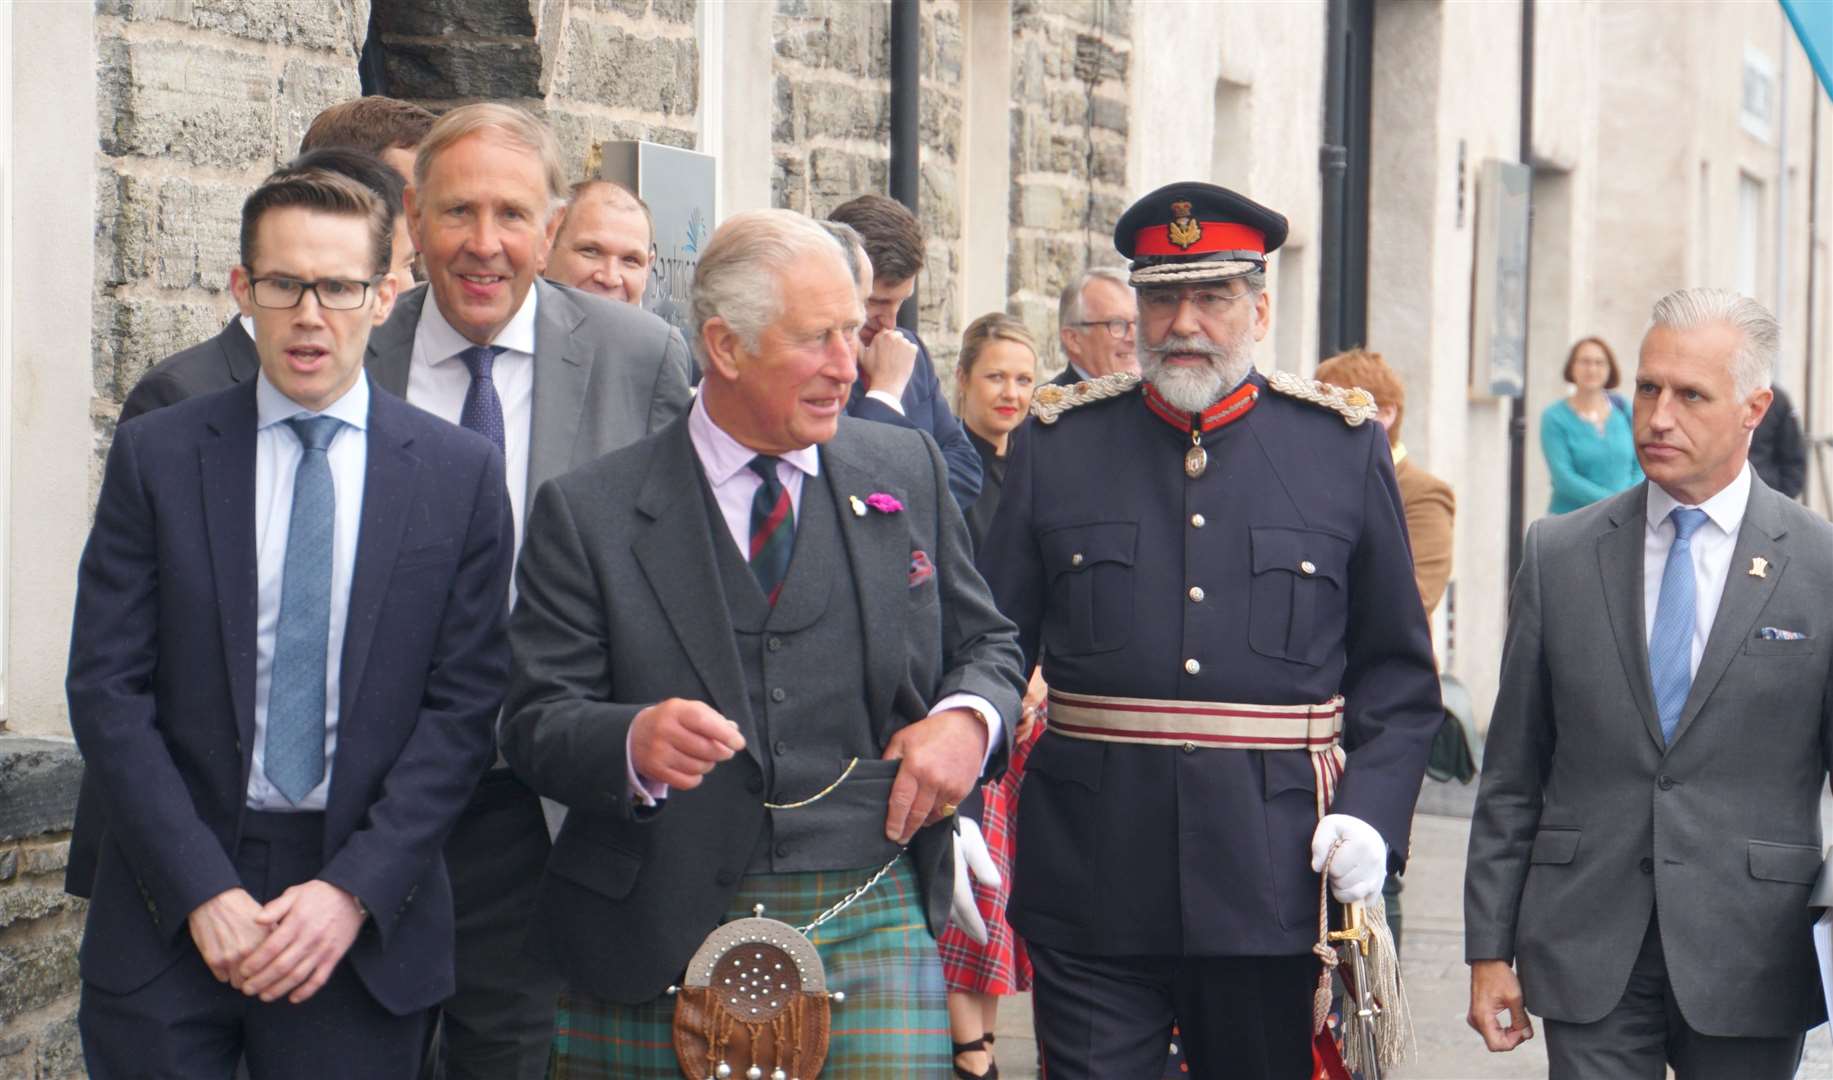 From left, Steve Wilson project director of Bowl, SSE chairman Richard Gillingwater, Prince Charles, Lord Thurso and Robert Lovie.